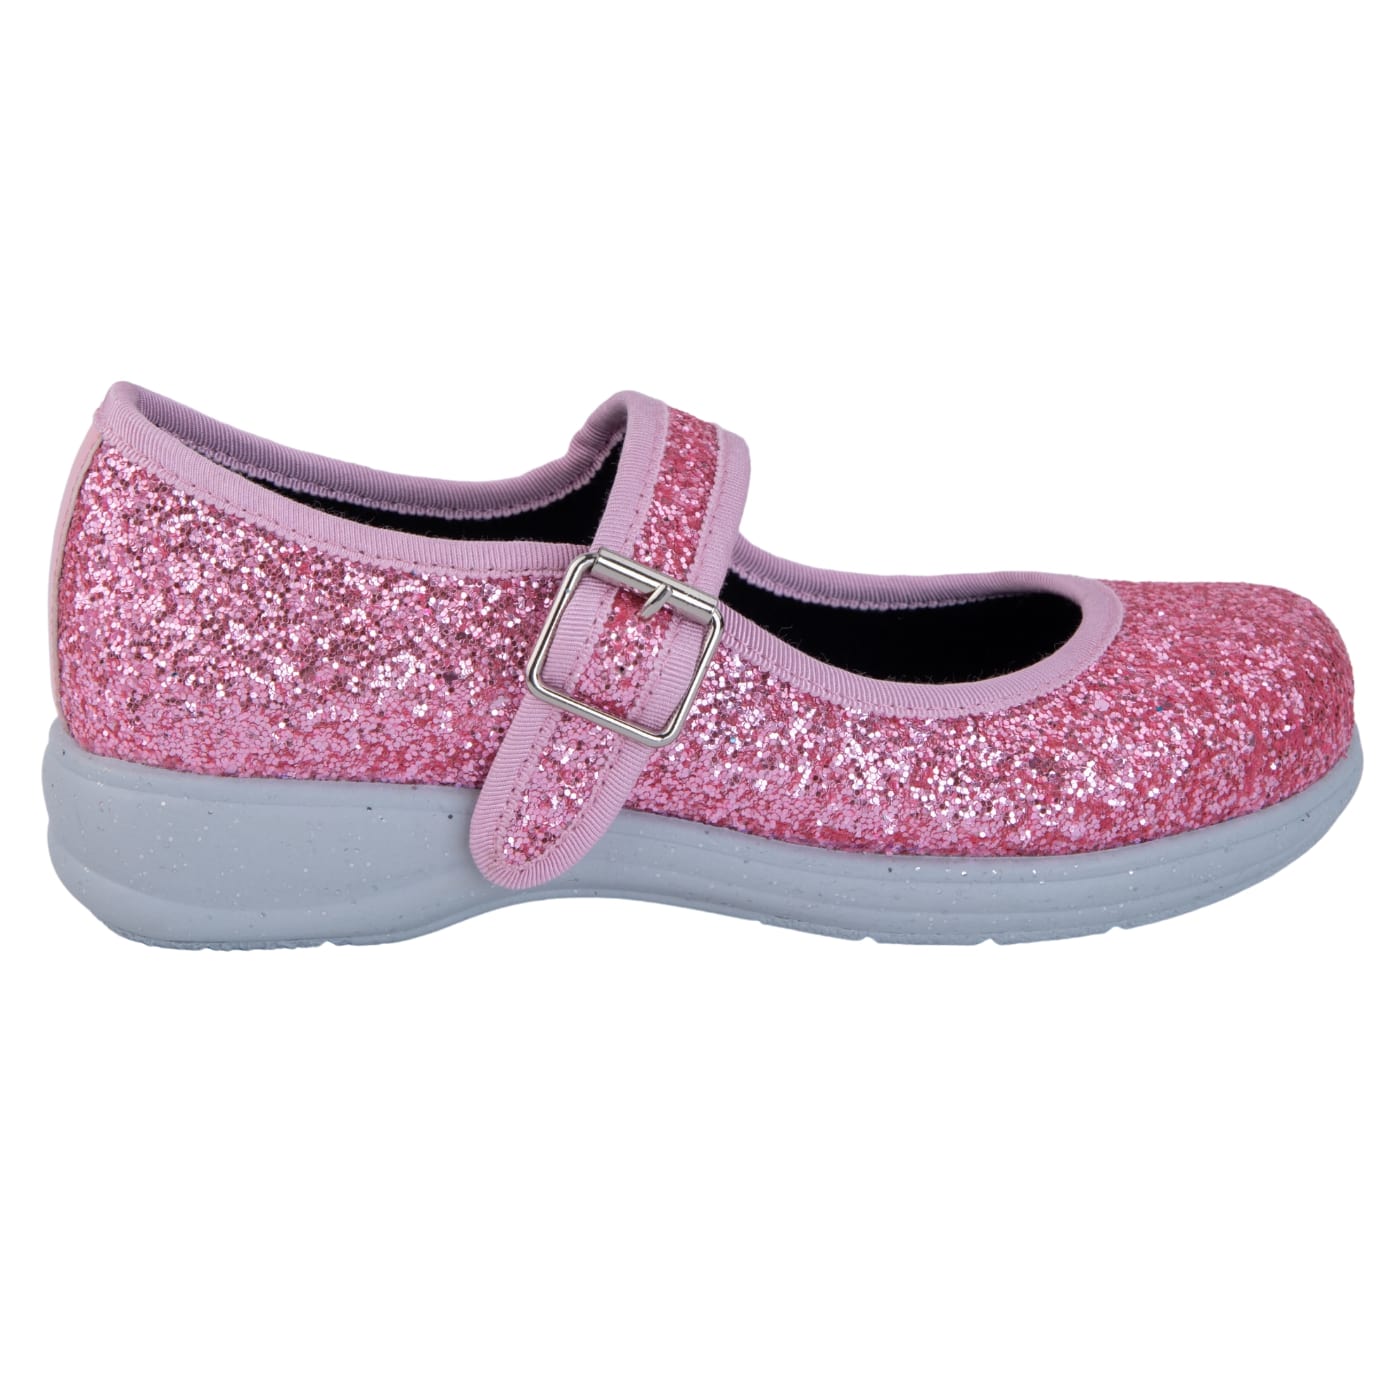 Fairy Floss Mary Janes by RainbowsAndFairies.com.au (Pink Glitter - Glitter Soles - Mismatched Shoes - Glitter Shoes - Sparkle) - SKU: FW_MARYJ_FRYFL_ORG - Pic-04